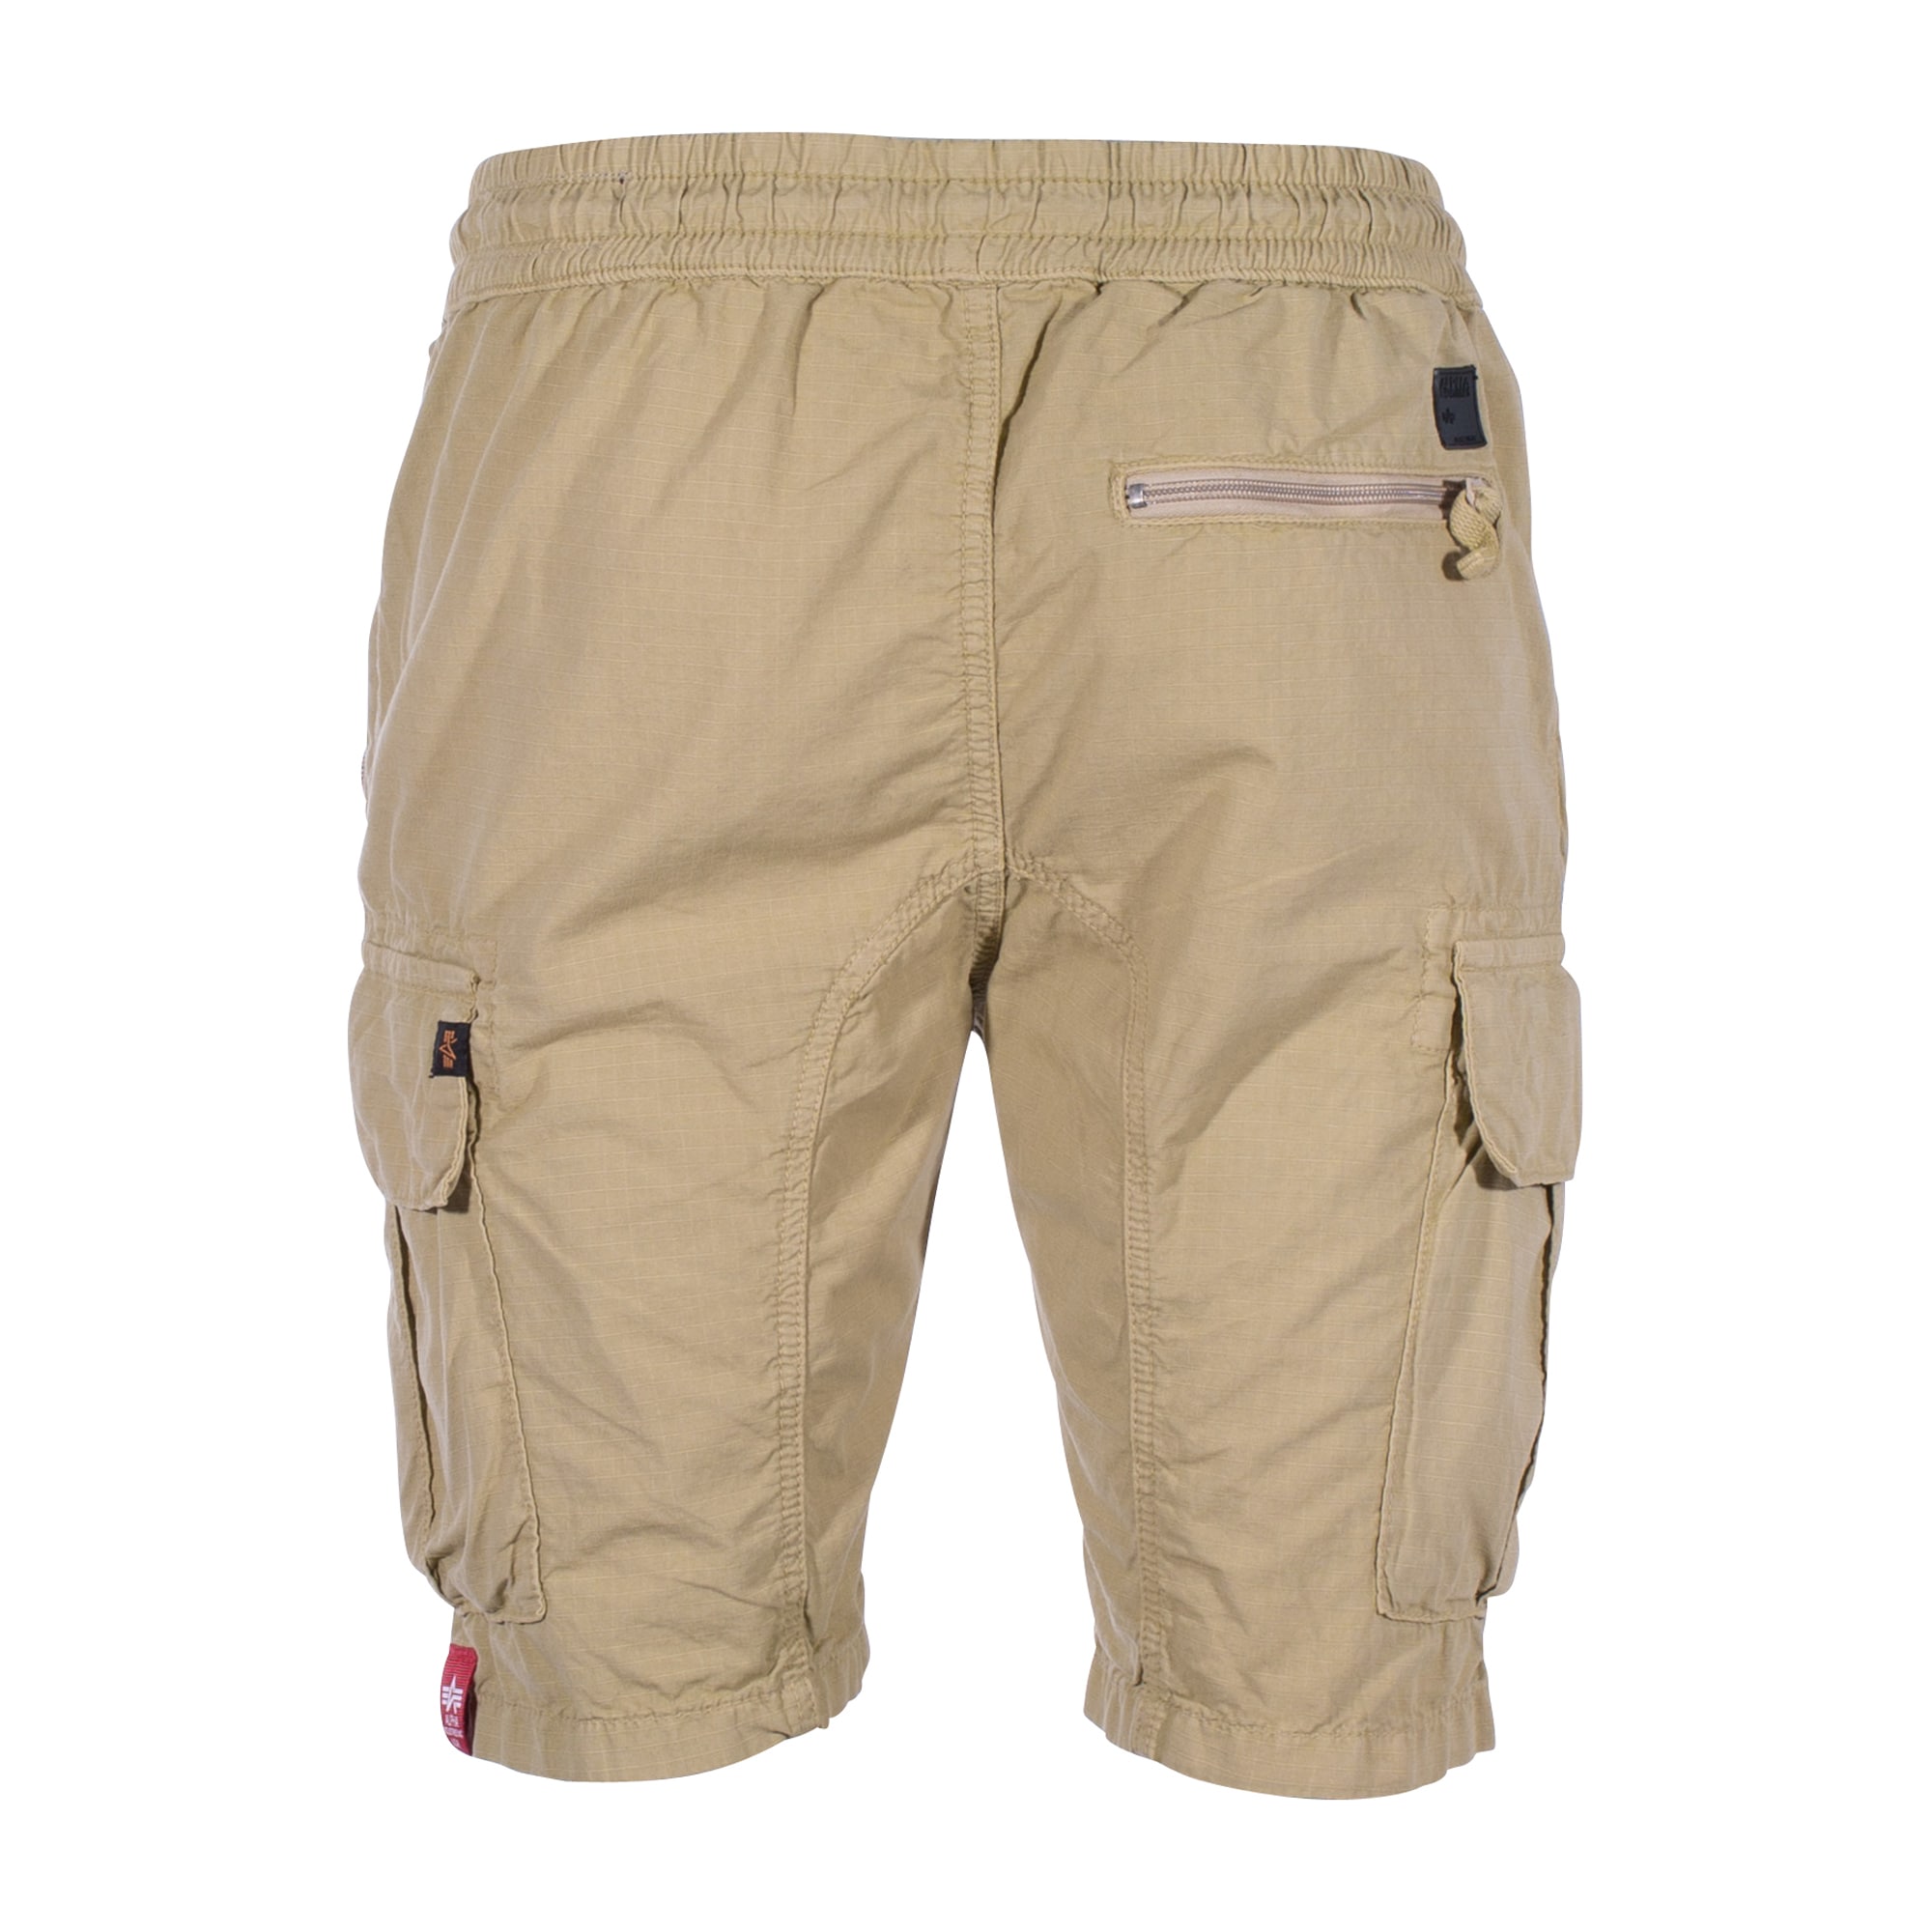 the by Jogger Ripstop Purchase Industries sand Short Alpha ASMC